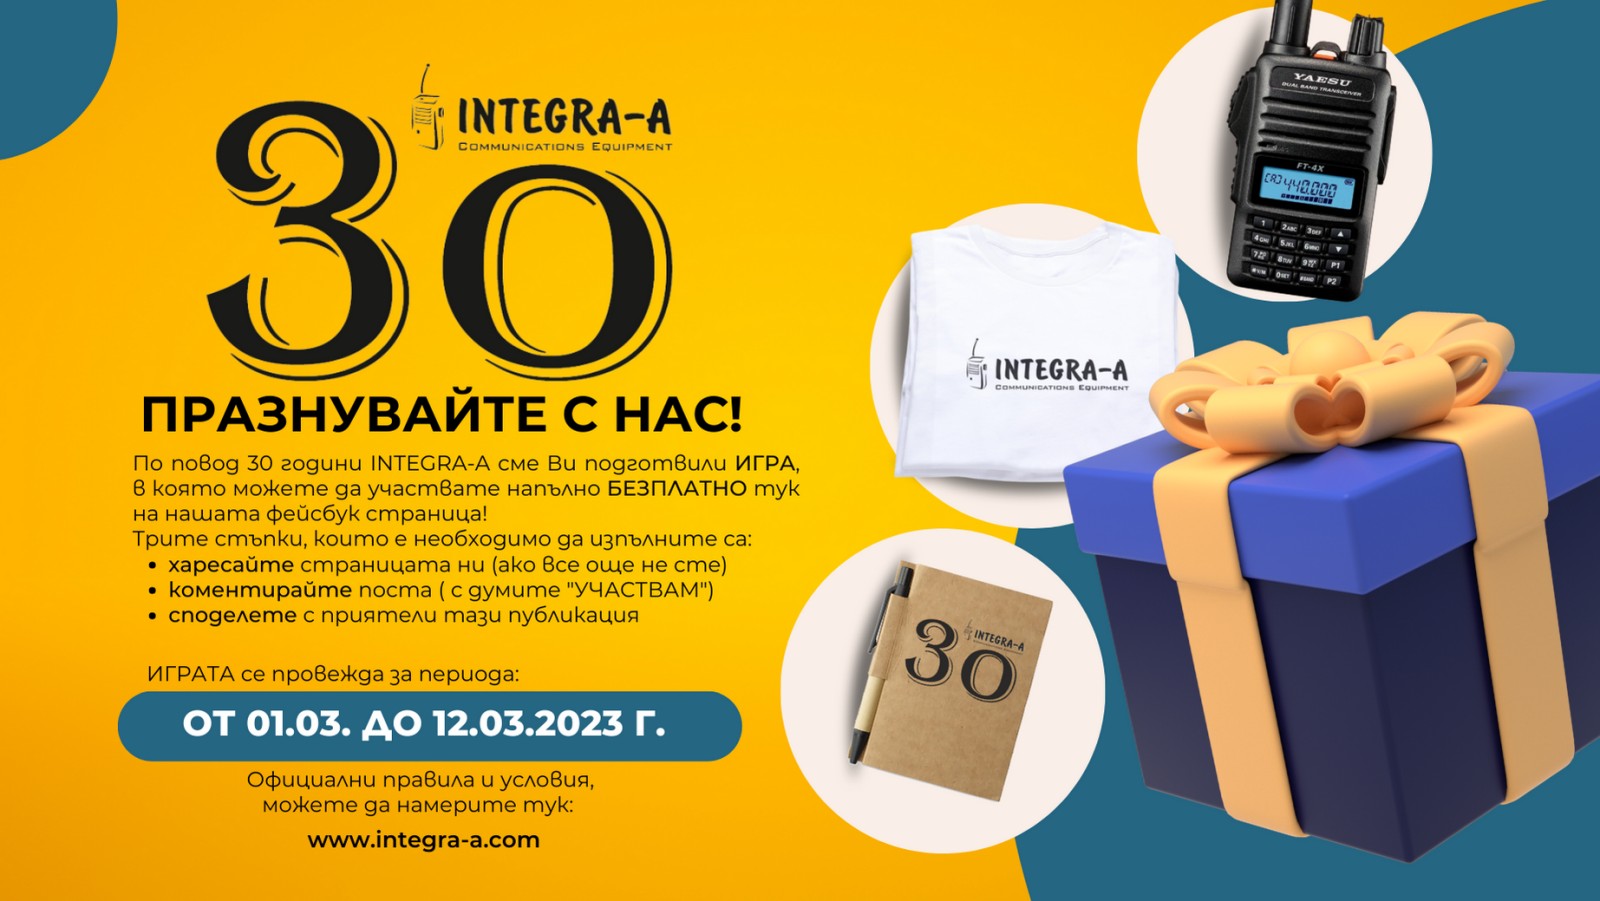 Celebrate with us 30 years INTEGRA-A! | Integra-a